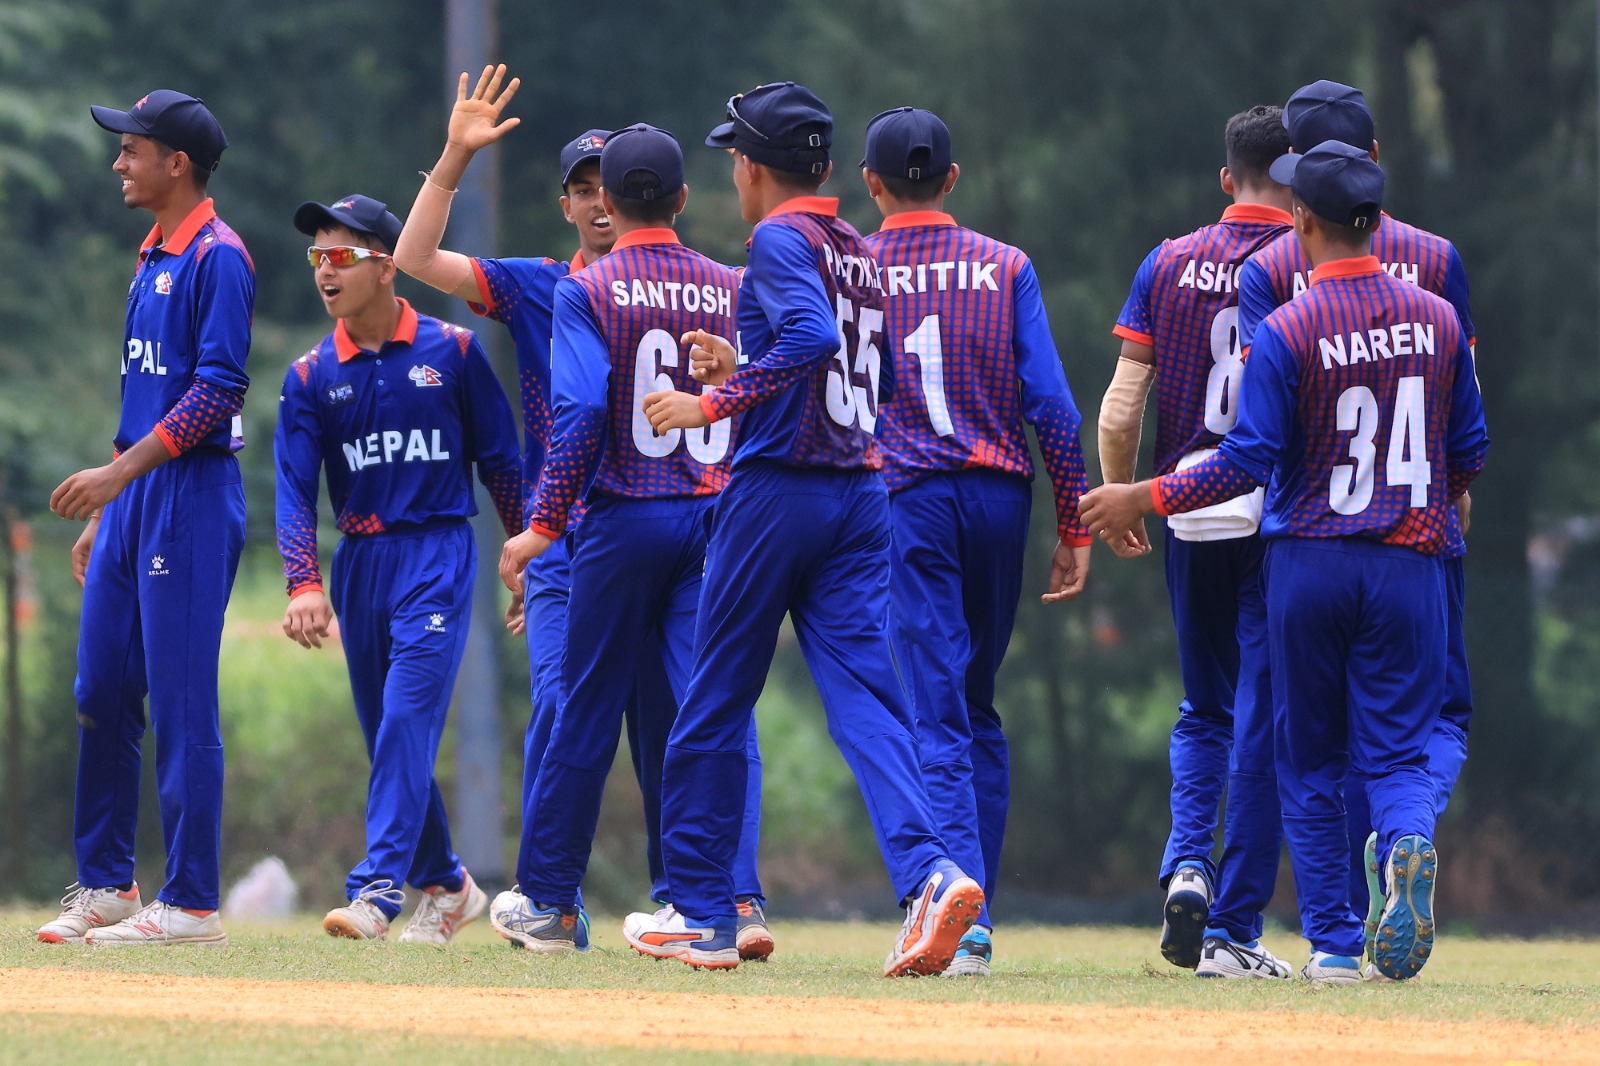 Nepal beat Singapore to reach the final of the ACC East Zone U16 Cup Cricket